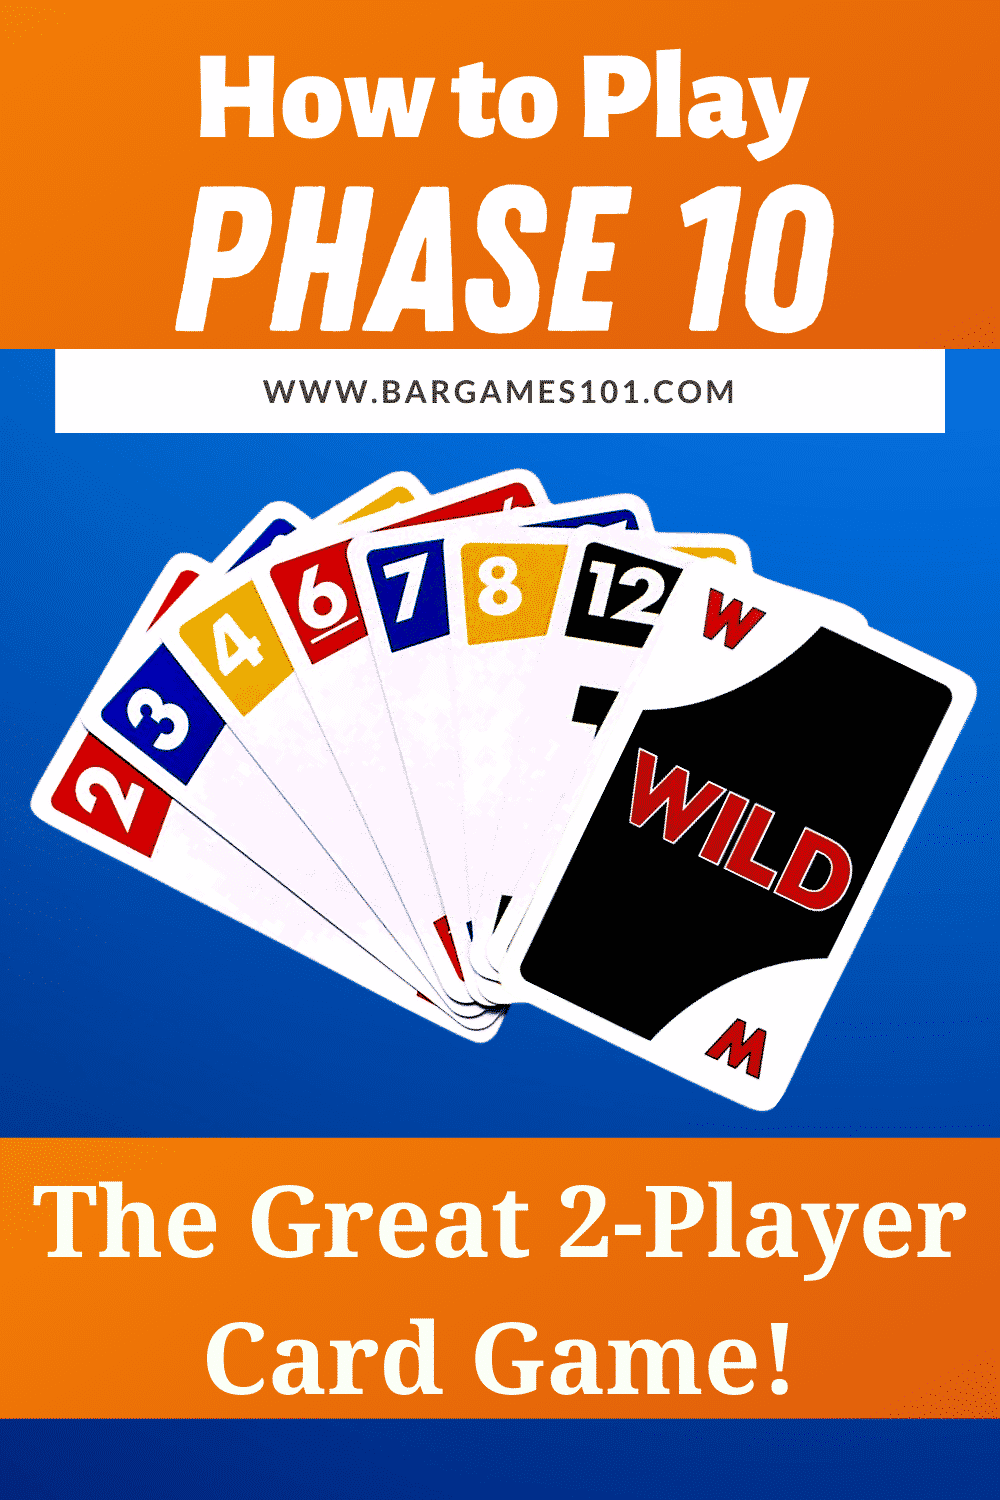 phase 10 rules